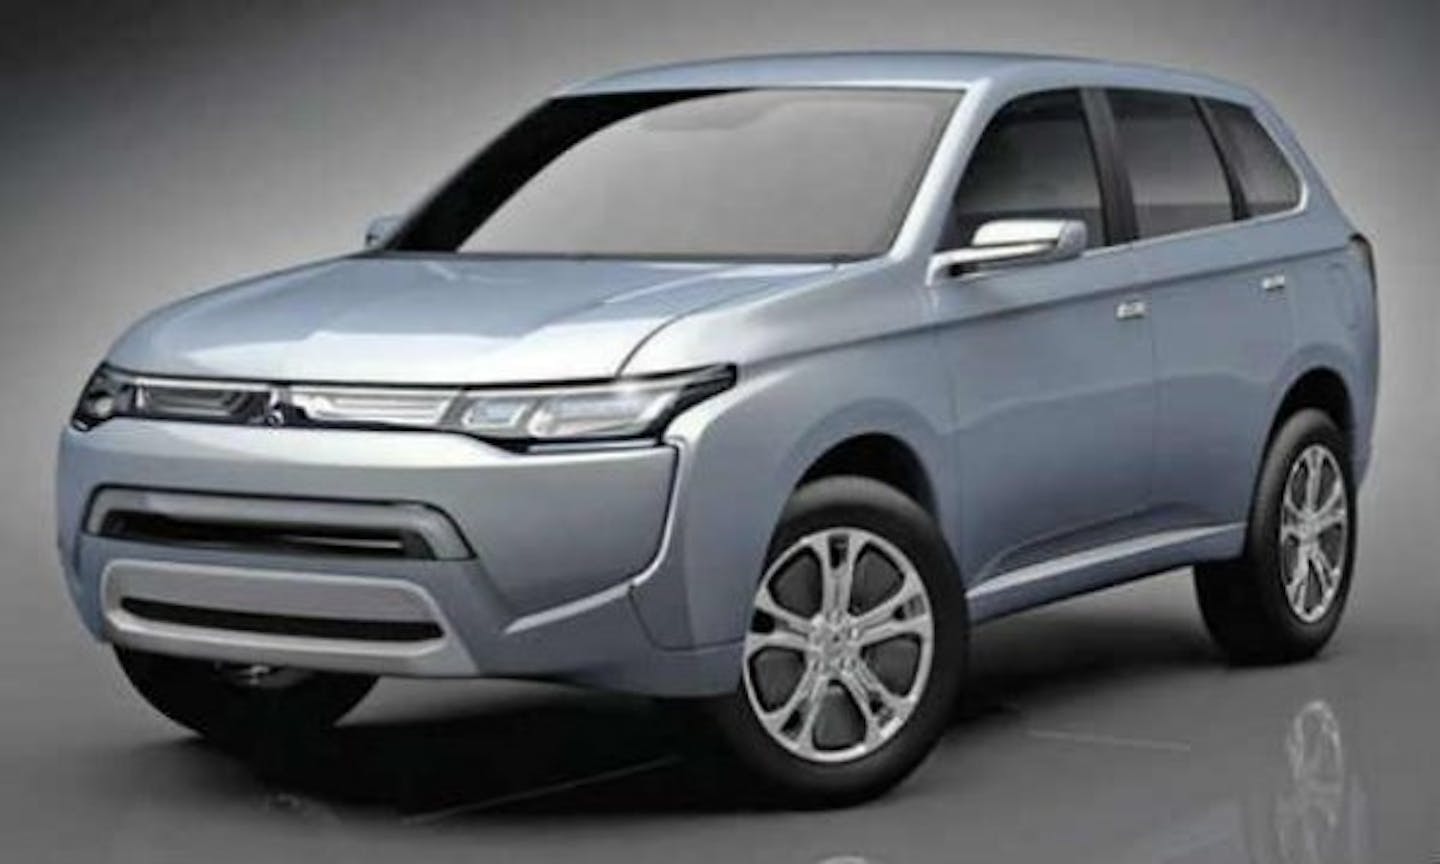 Electric Suv With 800km Range News Eco Business Asia Pacific